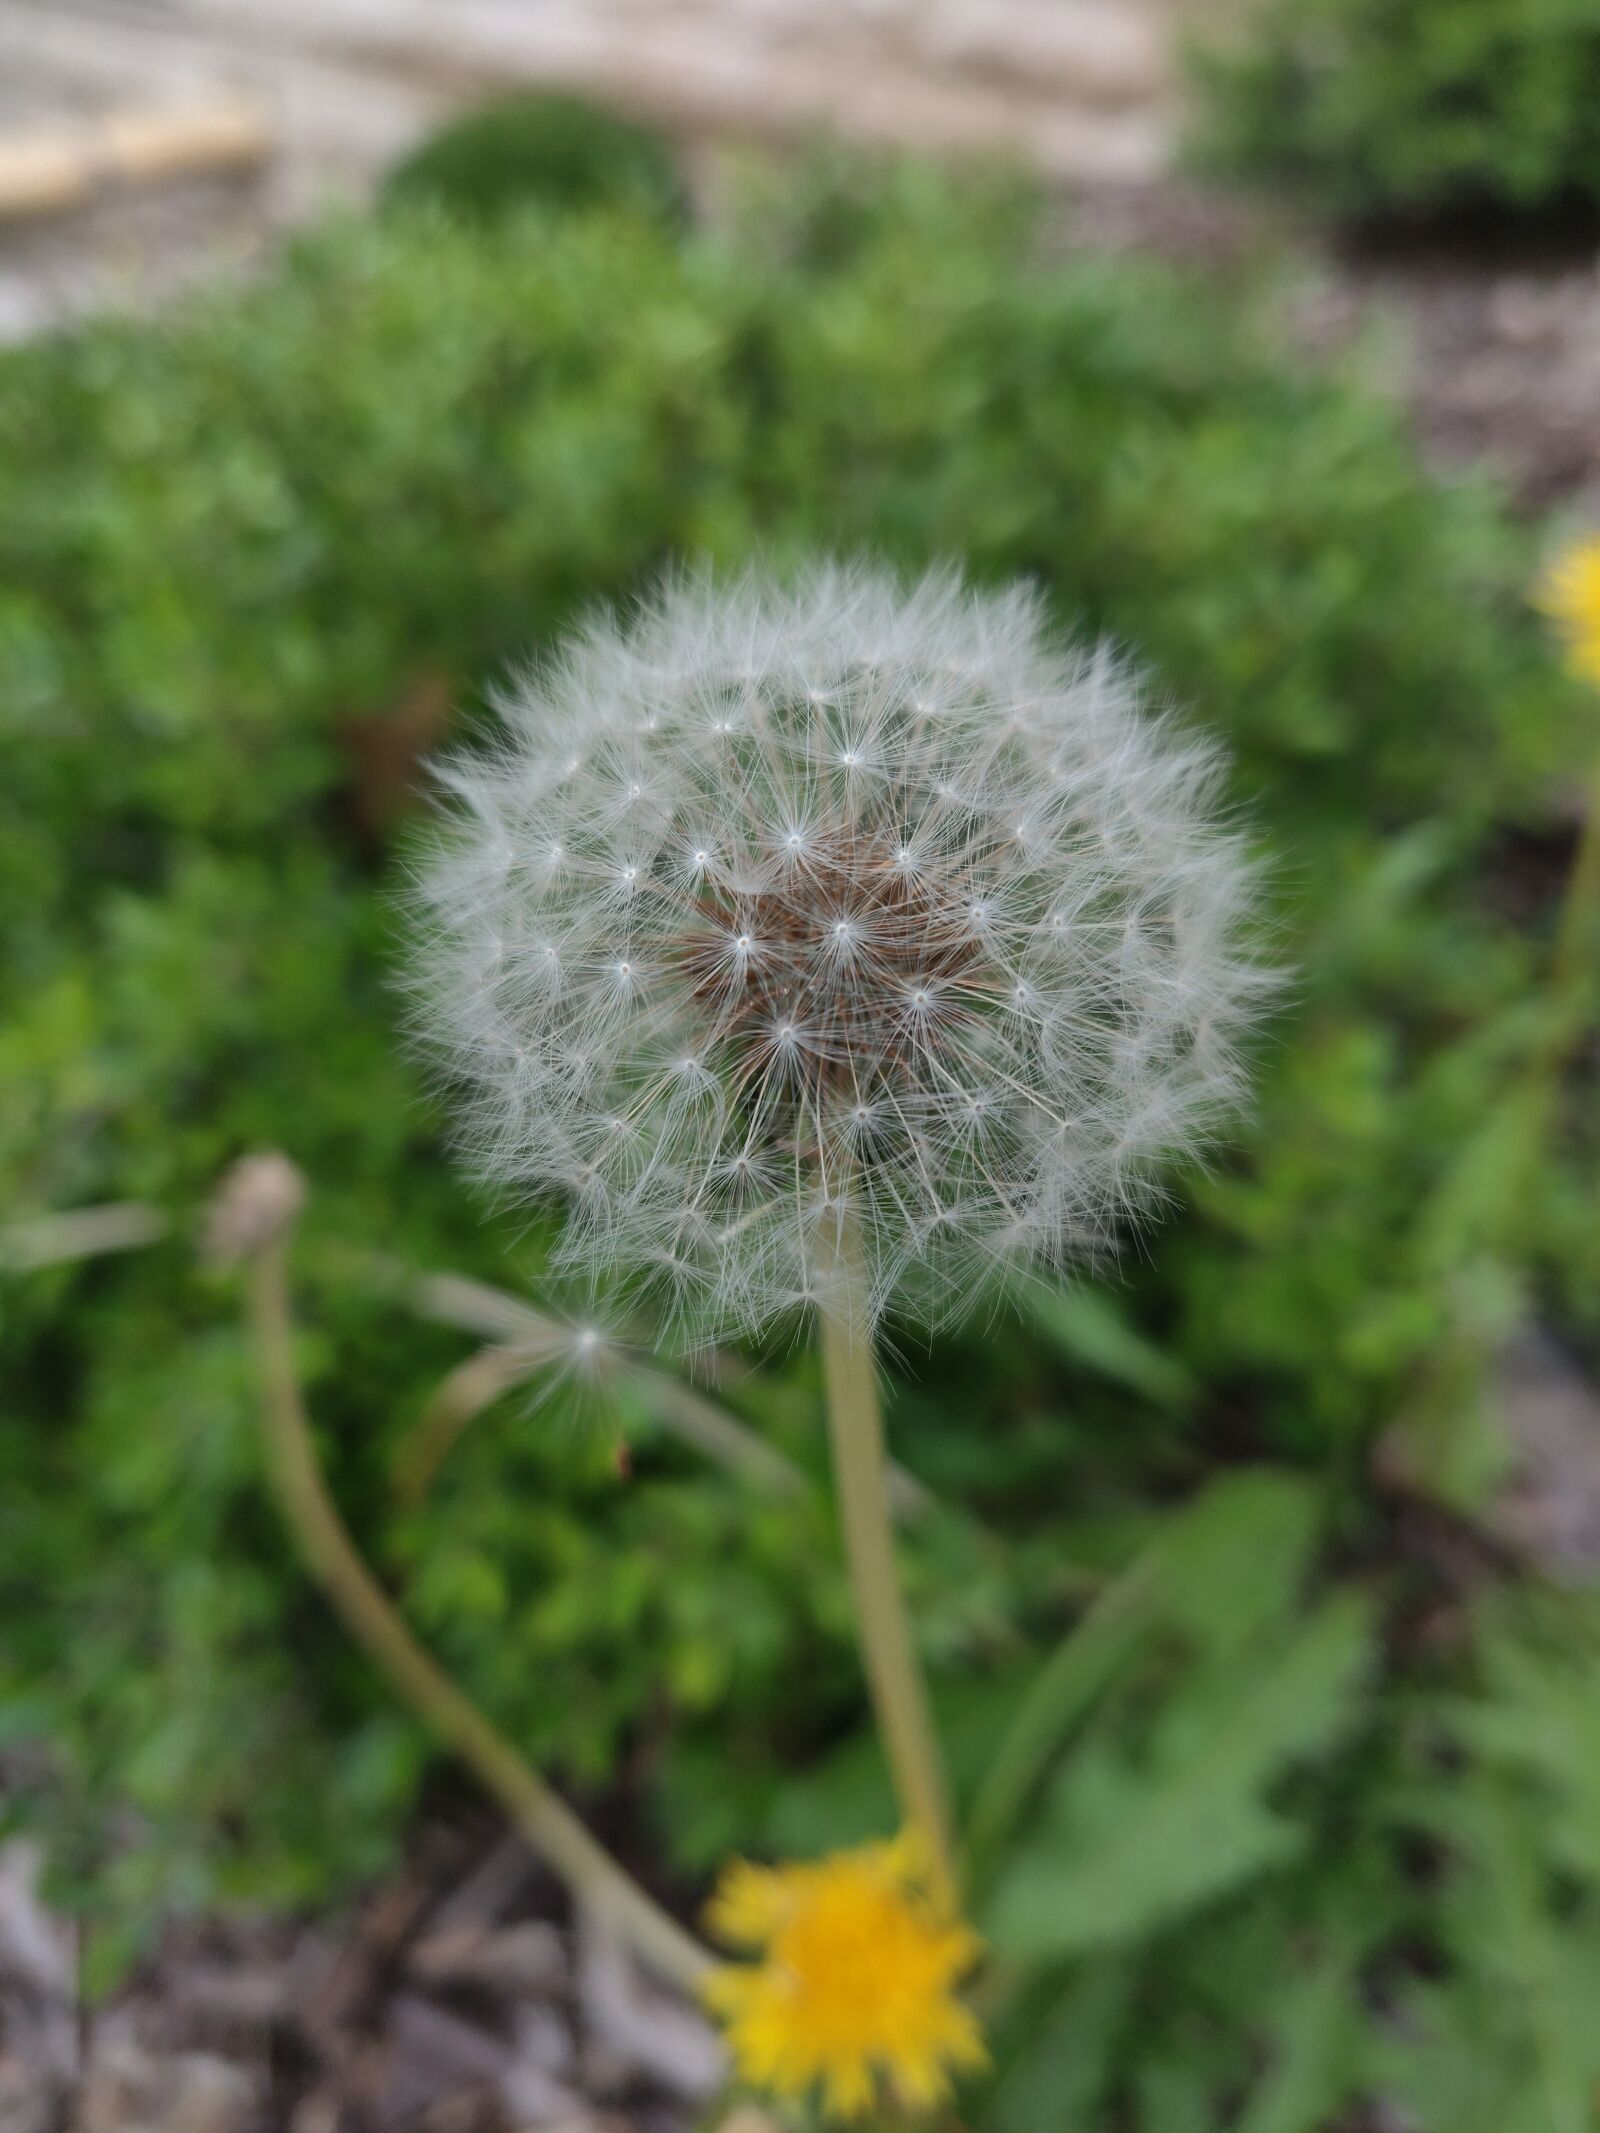 OnePlus 6T sample photo. Dandelion, nature, spring photography